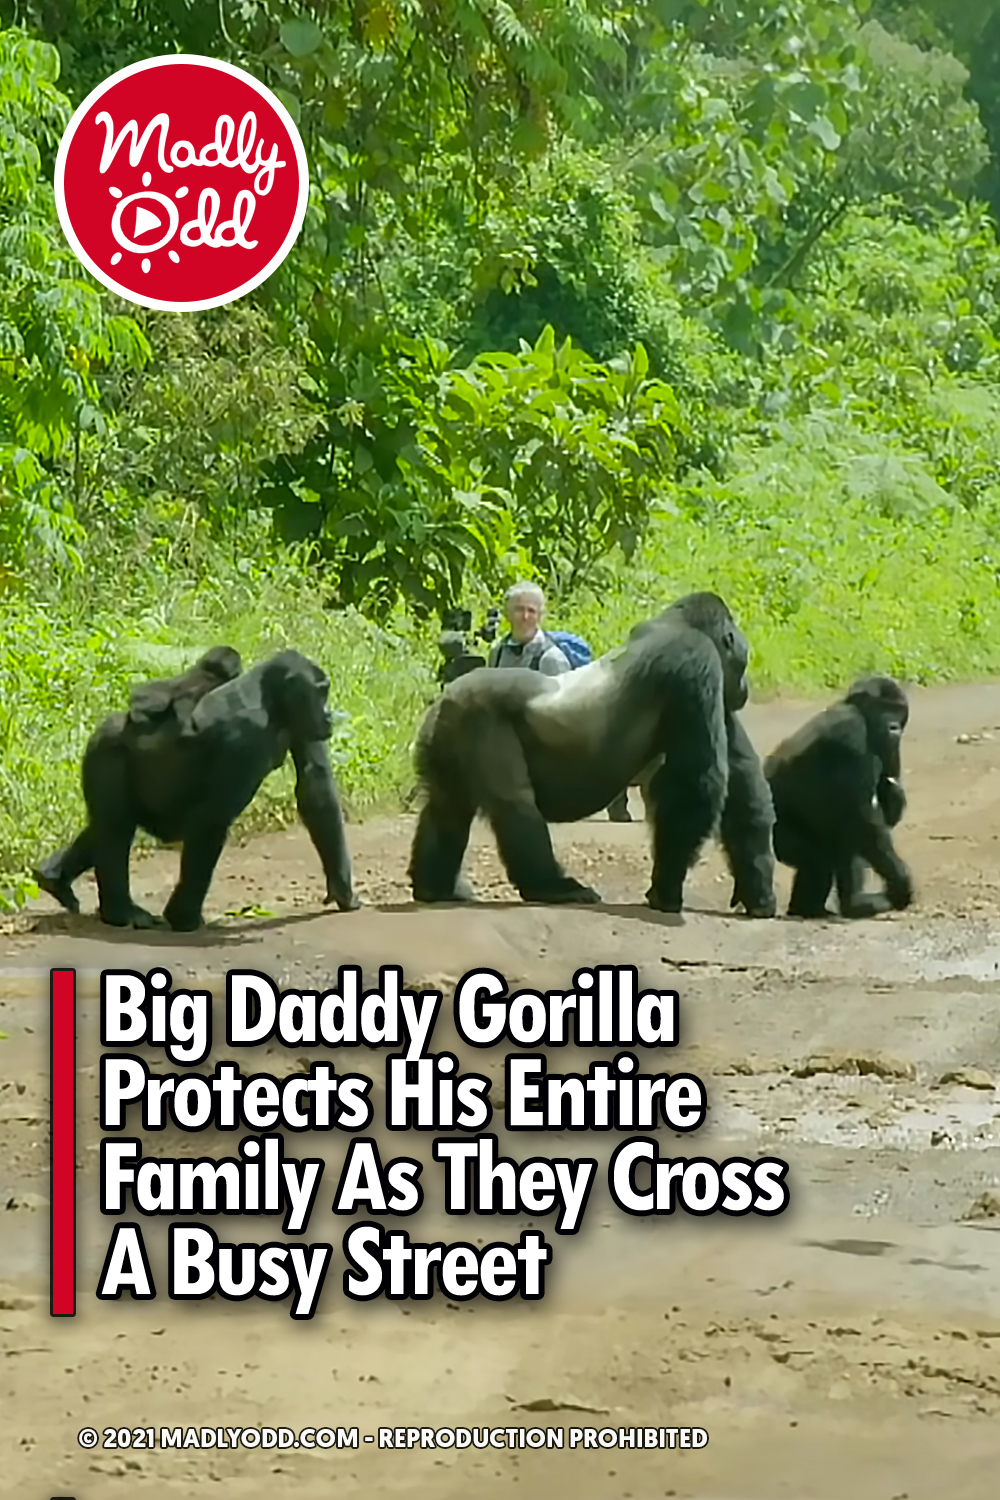 Big Daddy Gorilla Protects His Entire Family As They Cross A Busy Street